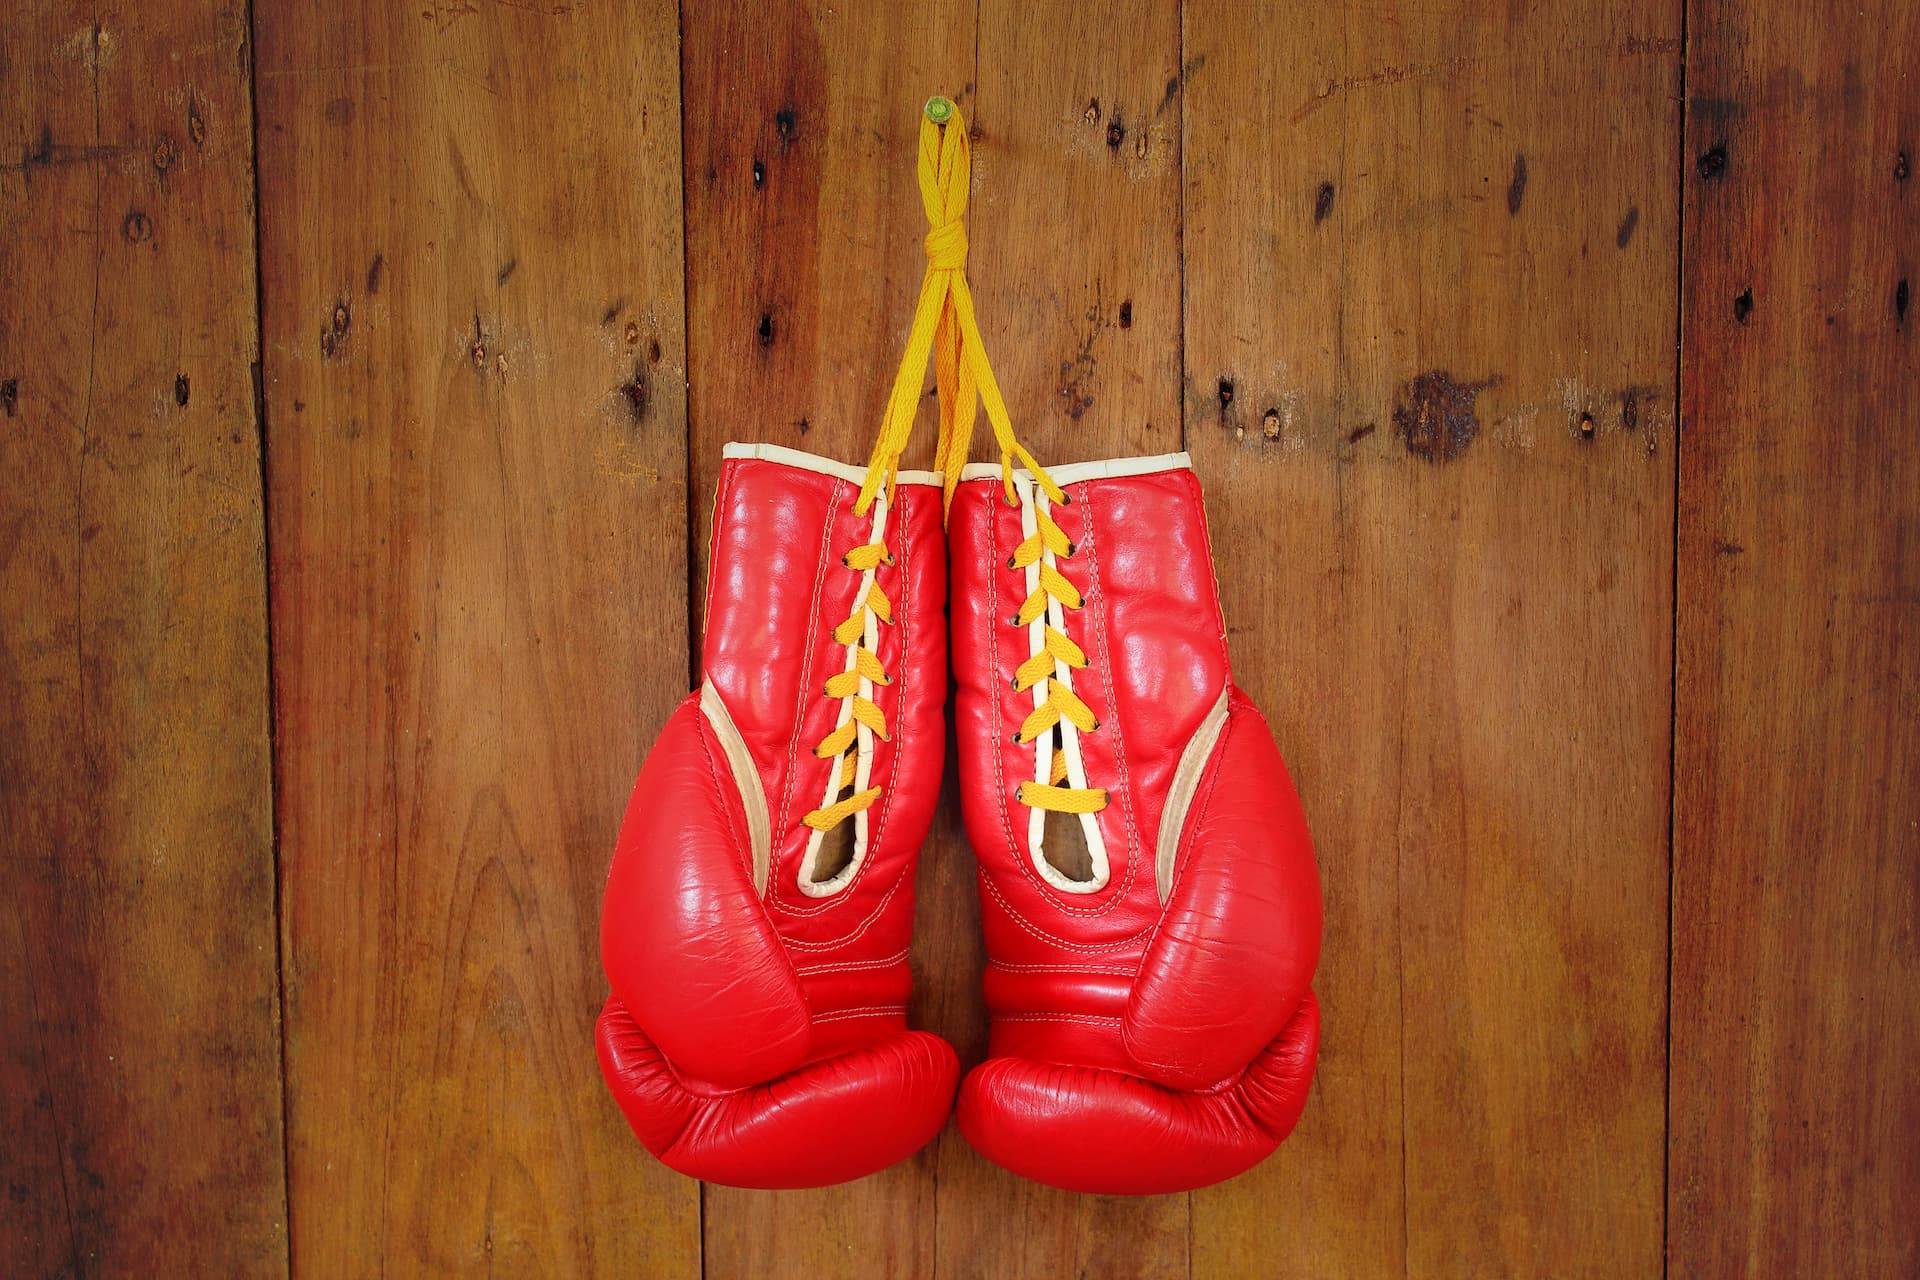 Boxing gloves hanging on the wall